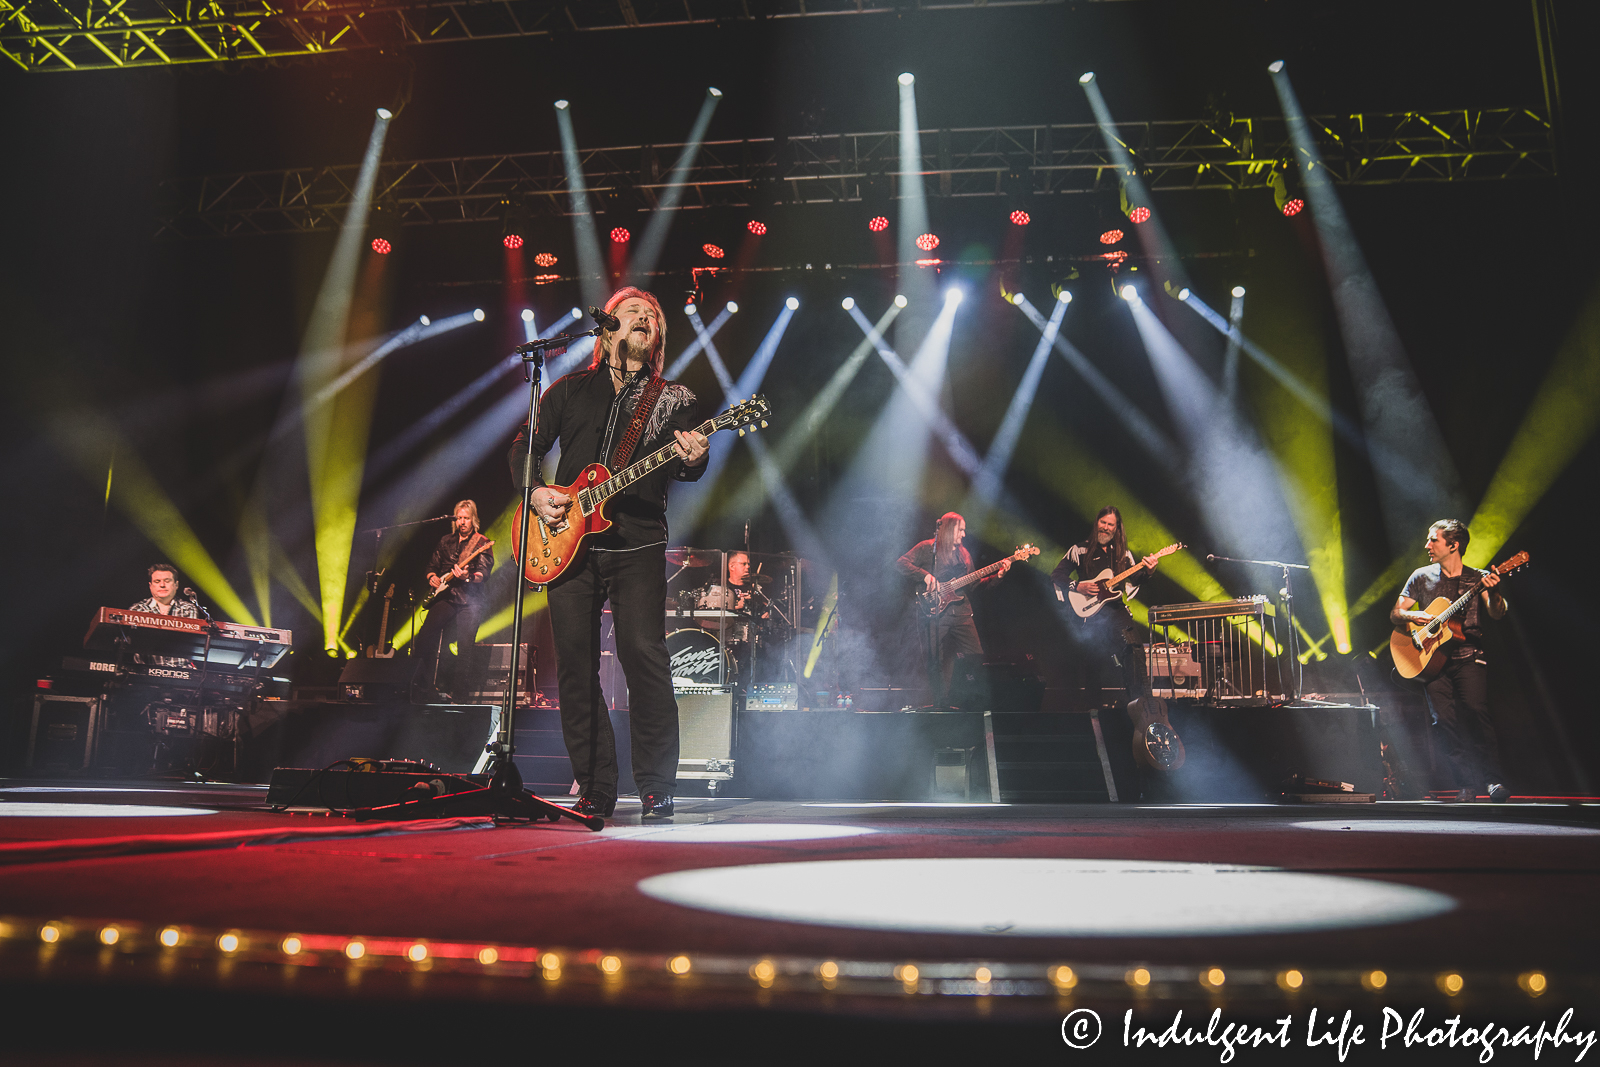 Travis Tritt and his band performing "Put Some Drive in Your Country" live at Ameristar Casino in Kansas City, MO on December 10, 2022.